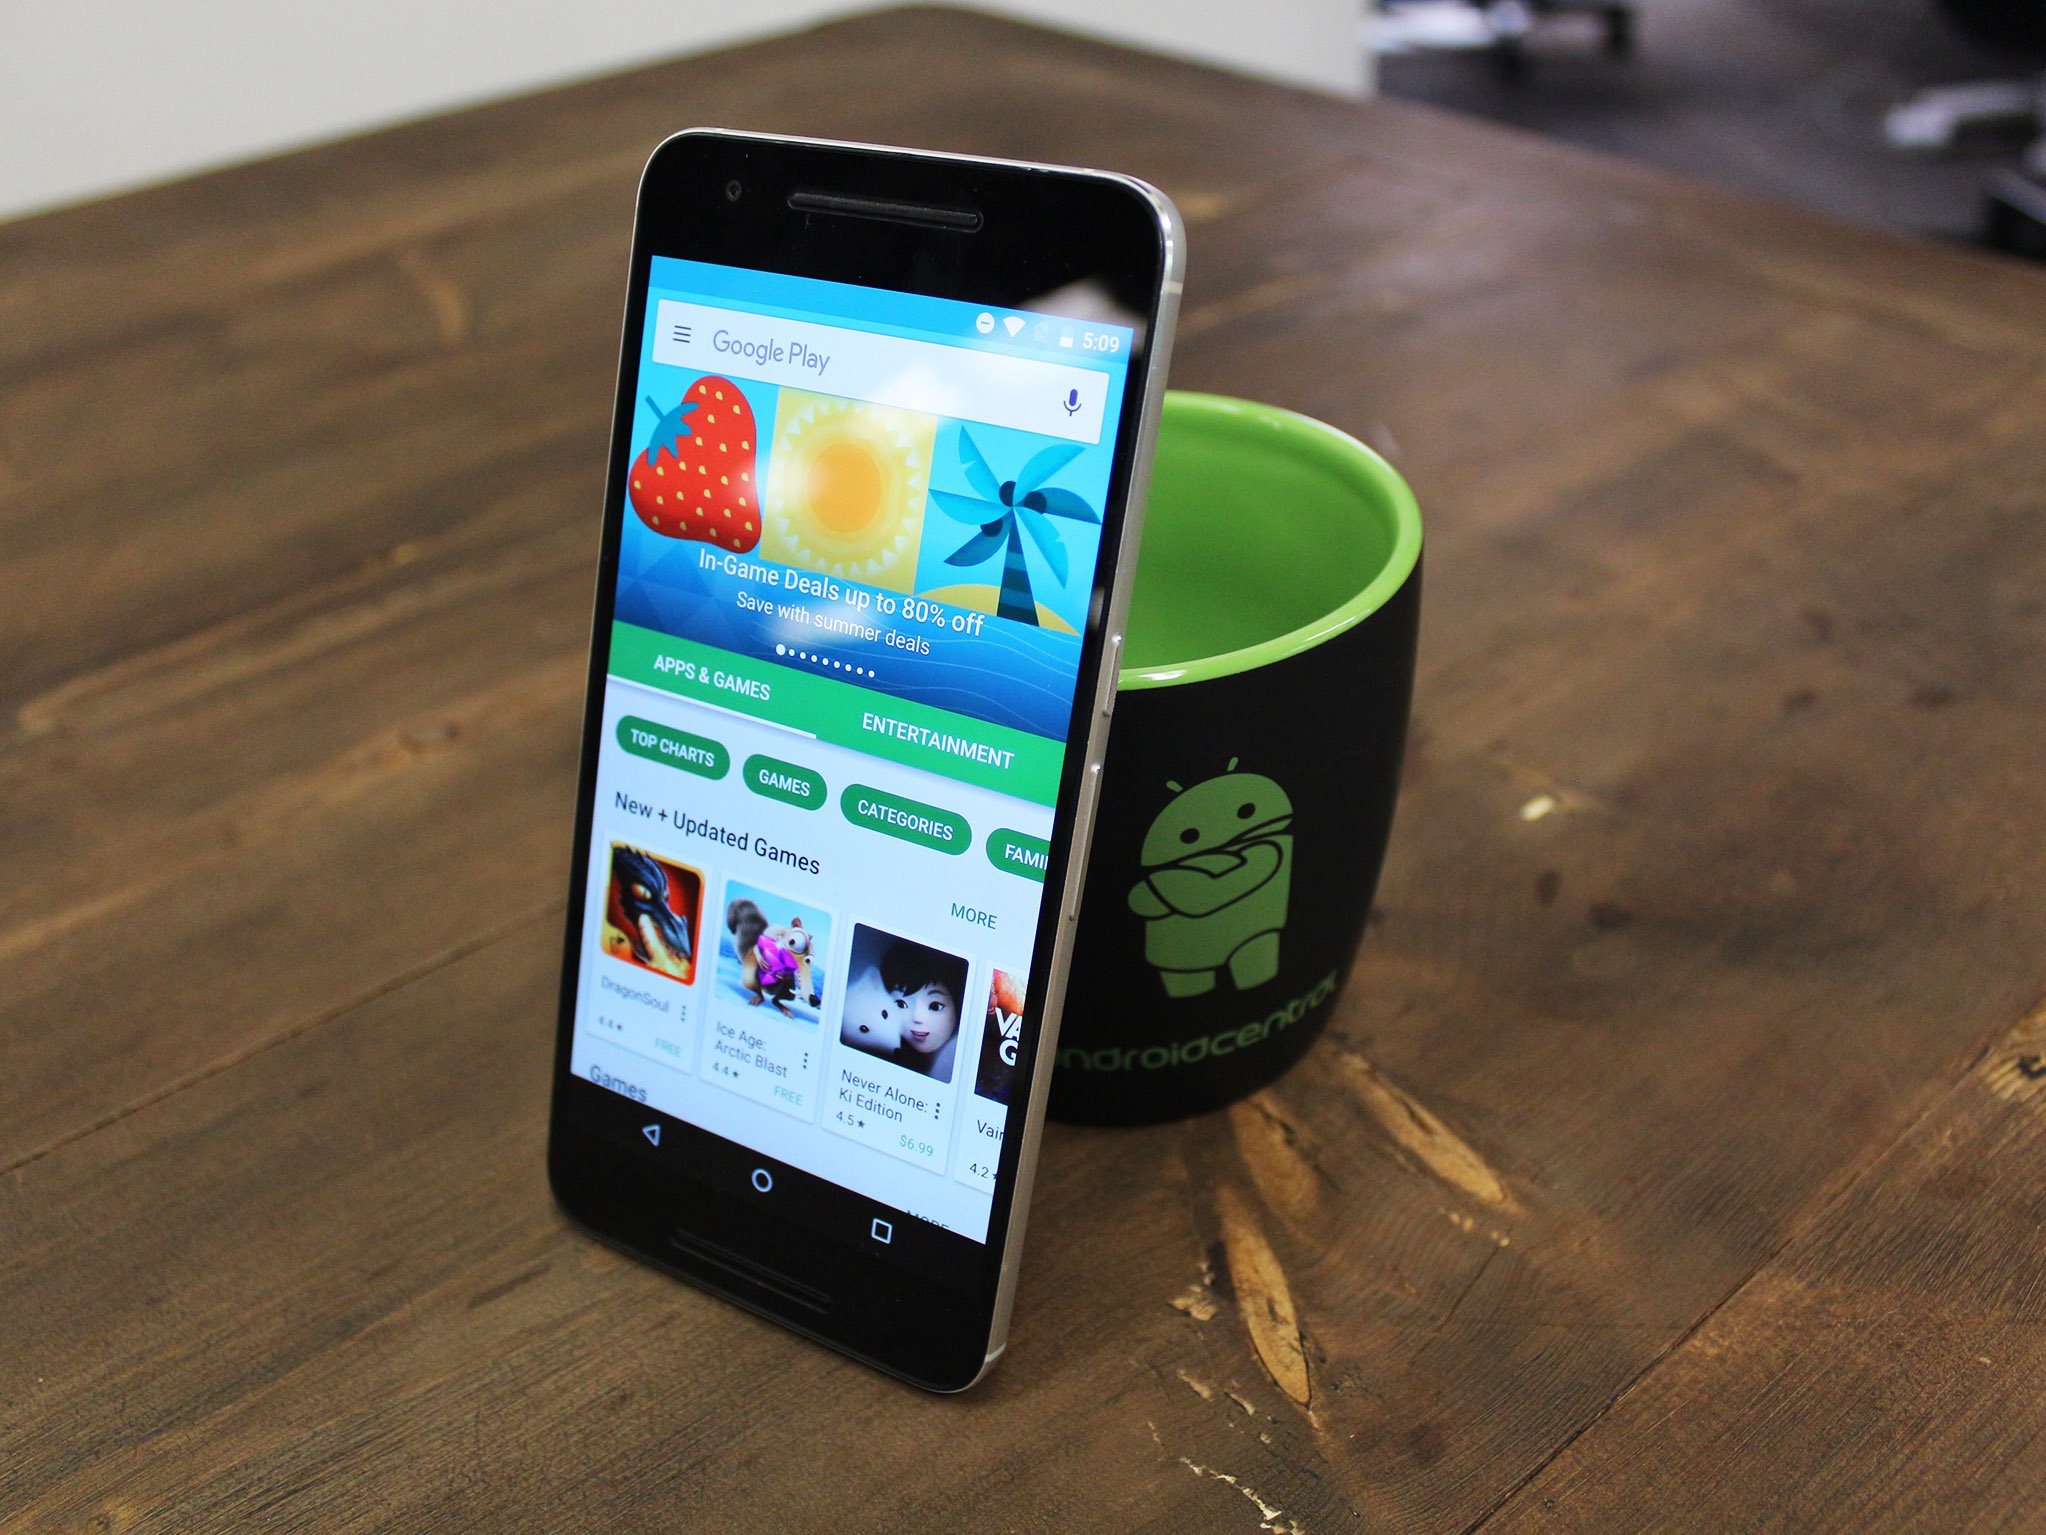 How to install and uninstall Google Play on Android